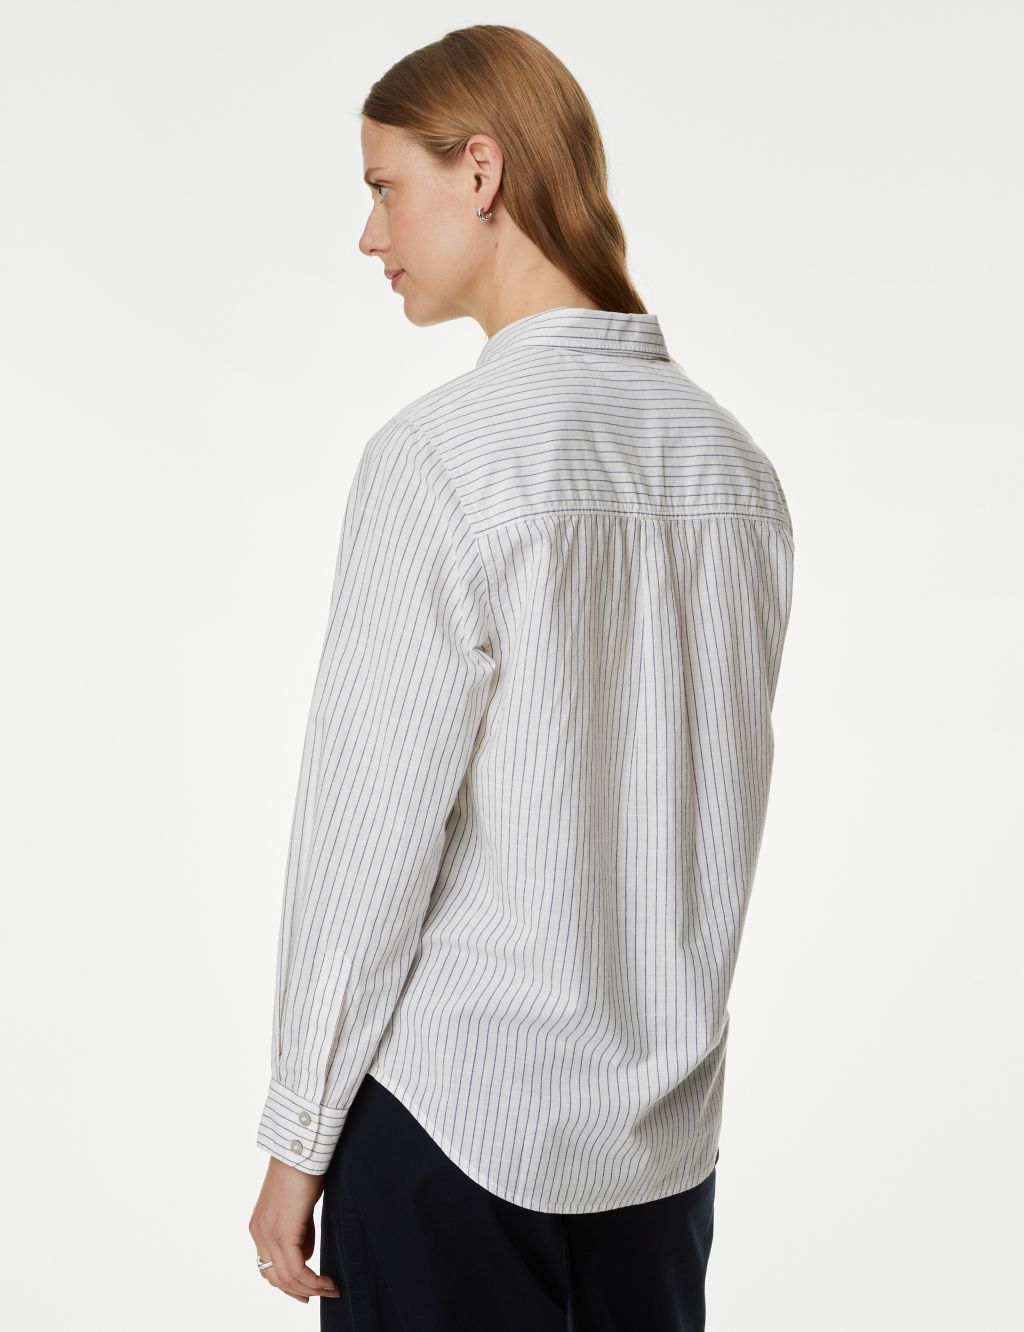 Pure Cotton Striped Collared Shirt image 4